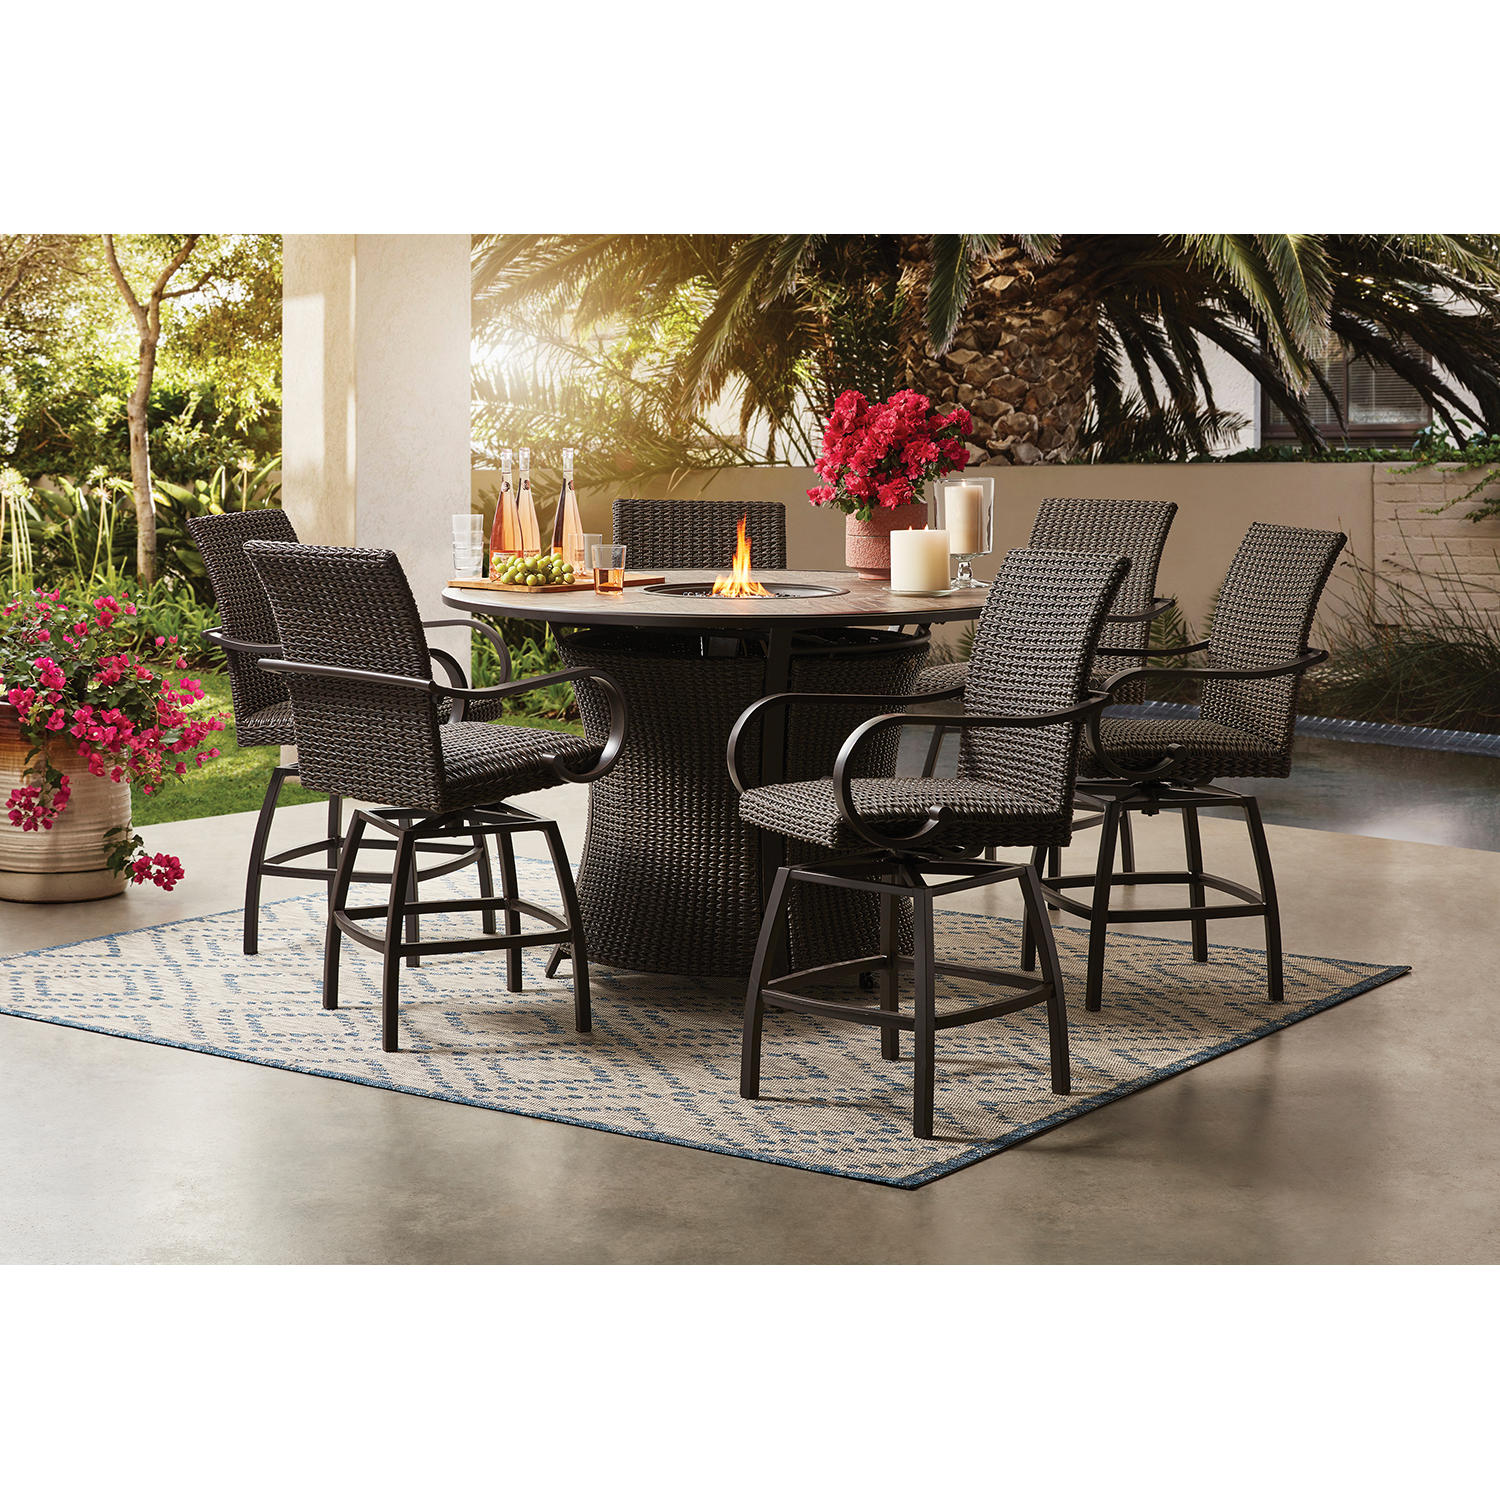 Member’s Mark Homewood 7-Piece Counter Height Fire Pit Patio Set